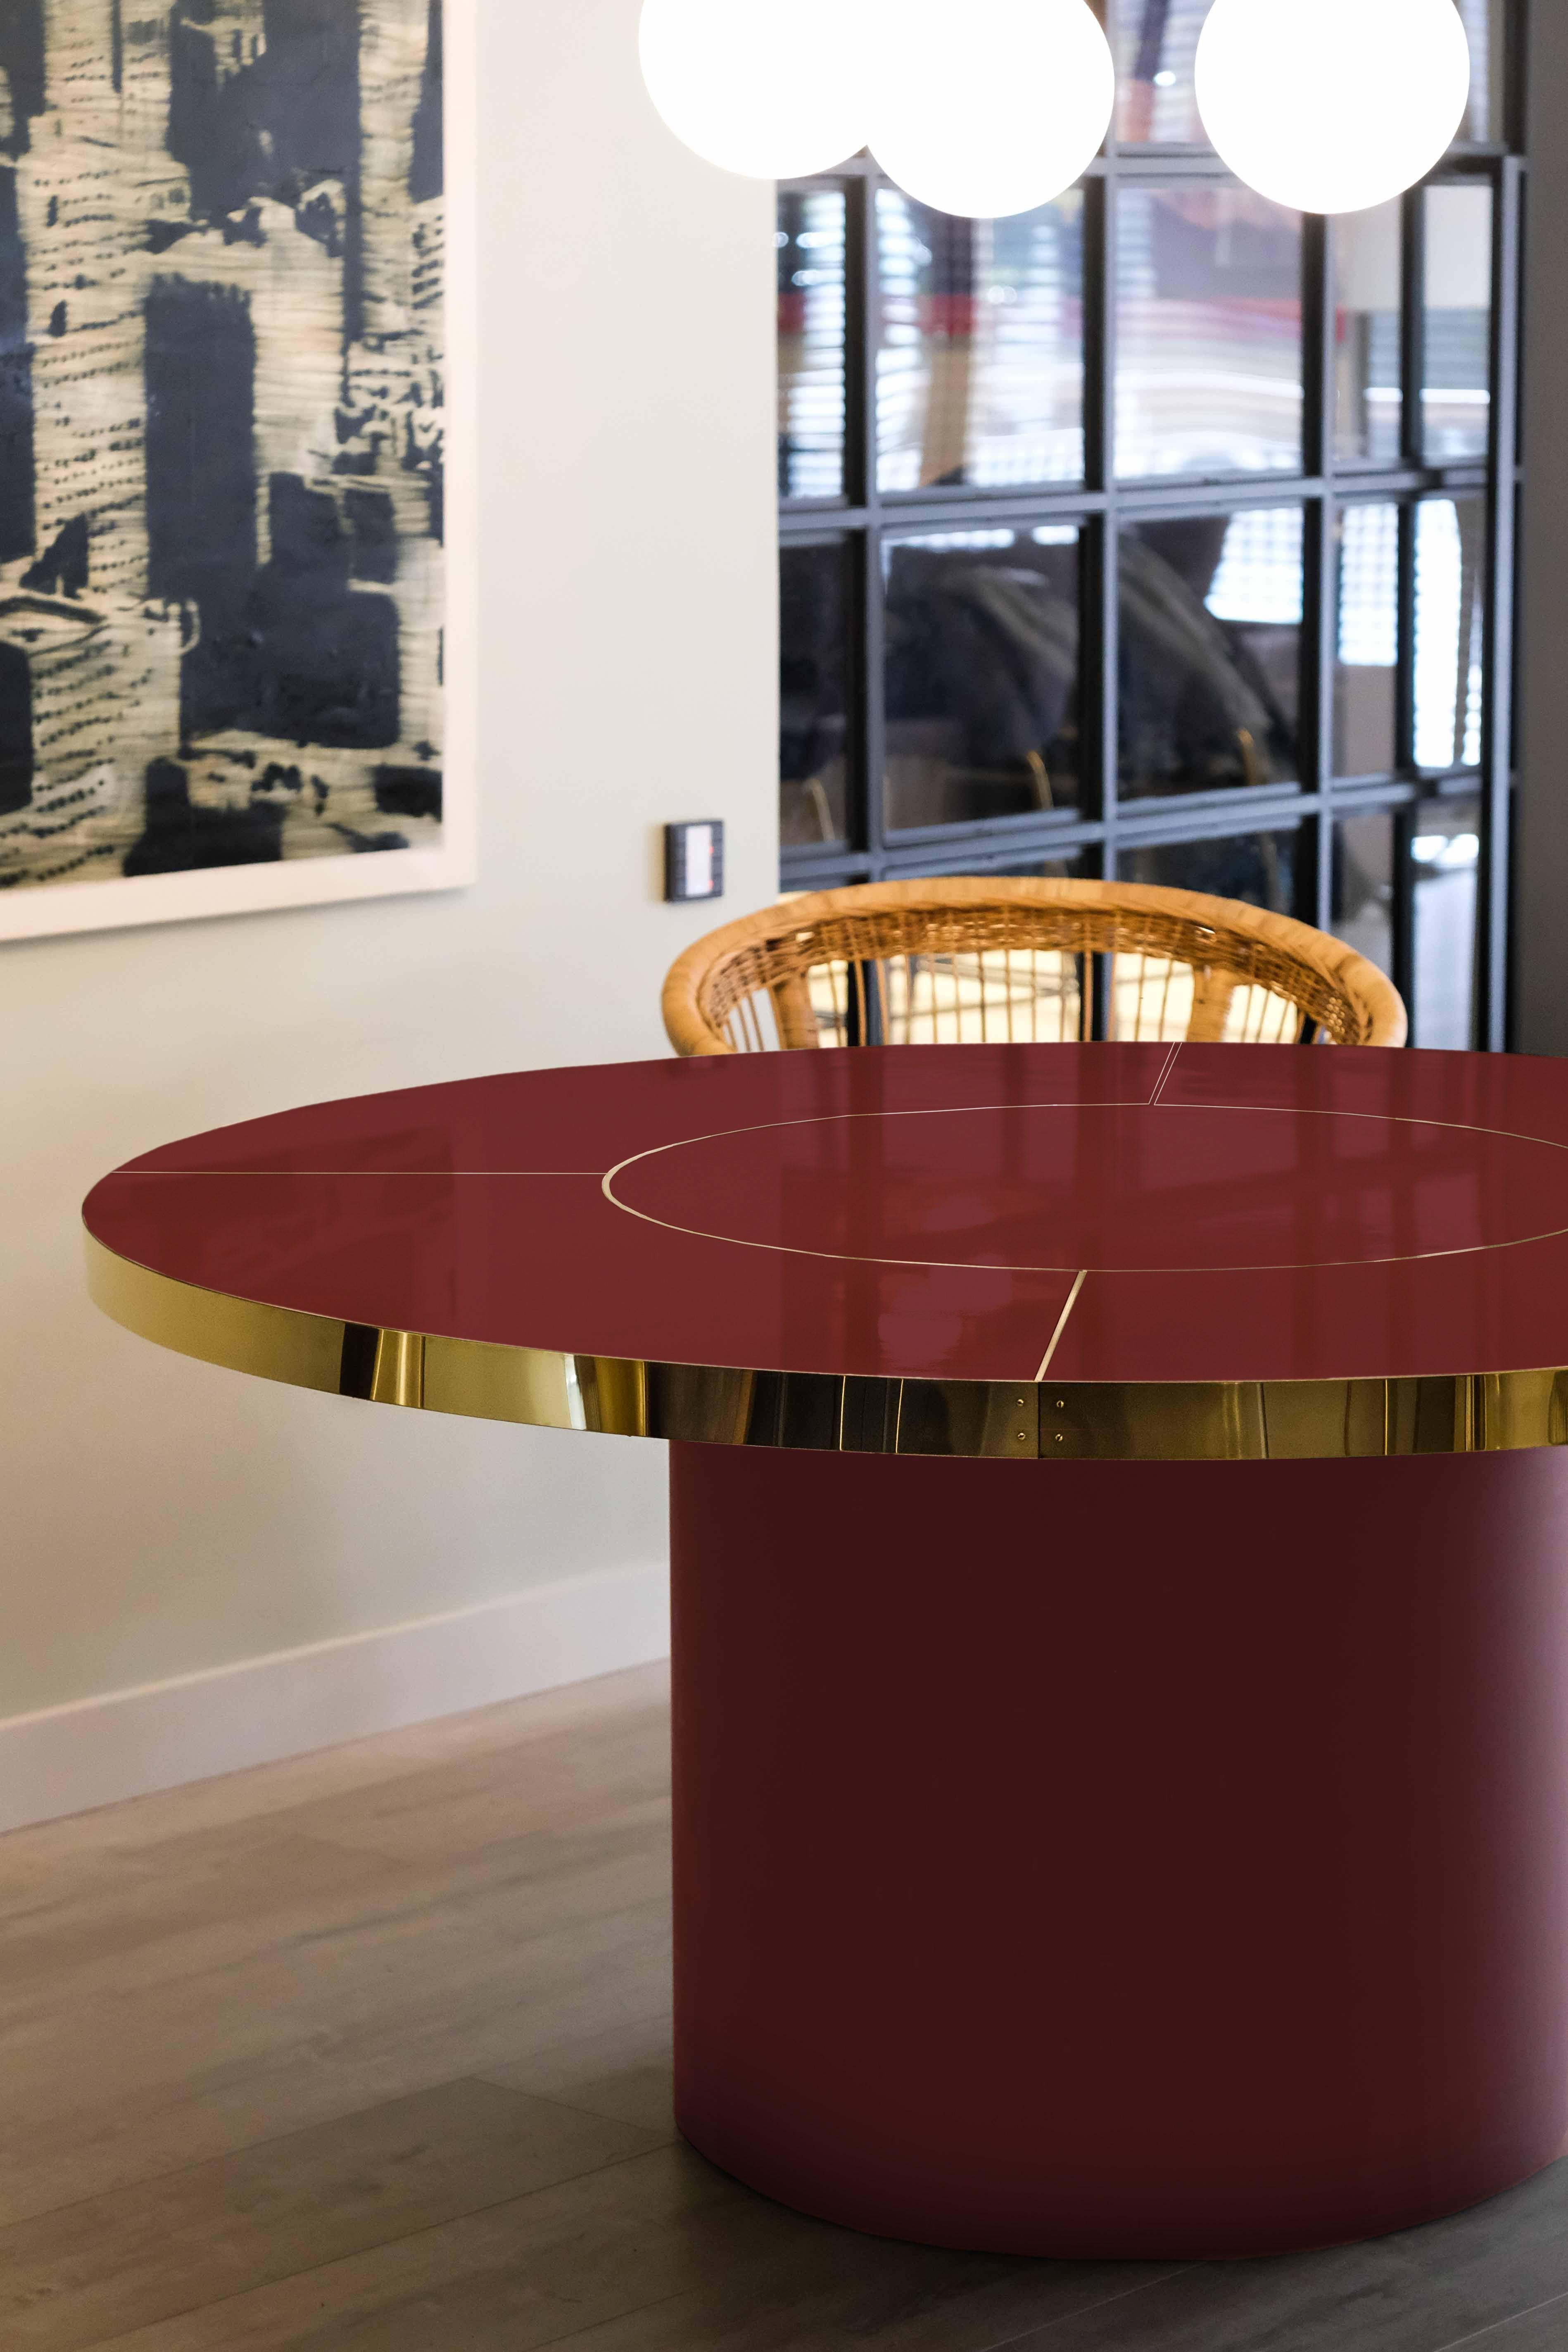 Retro Design Round Dining Table Palm Springs Style High Gloss Laminated & Brass Details Large Size

Discover our incredible collection of retro-style design tables inspired by the iconic decoration of the 1950s, 60s, and 70s of Palm Springs in